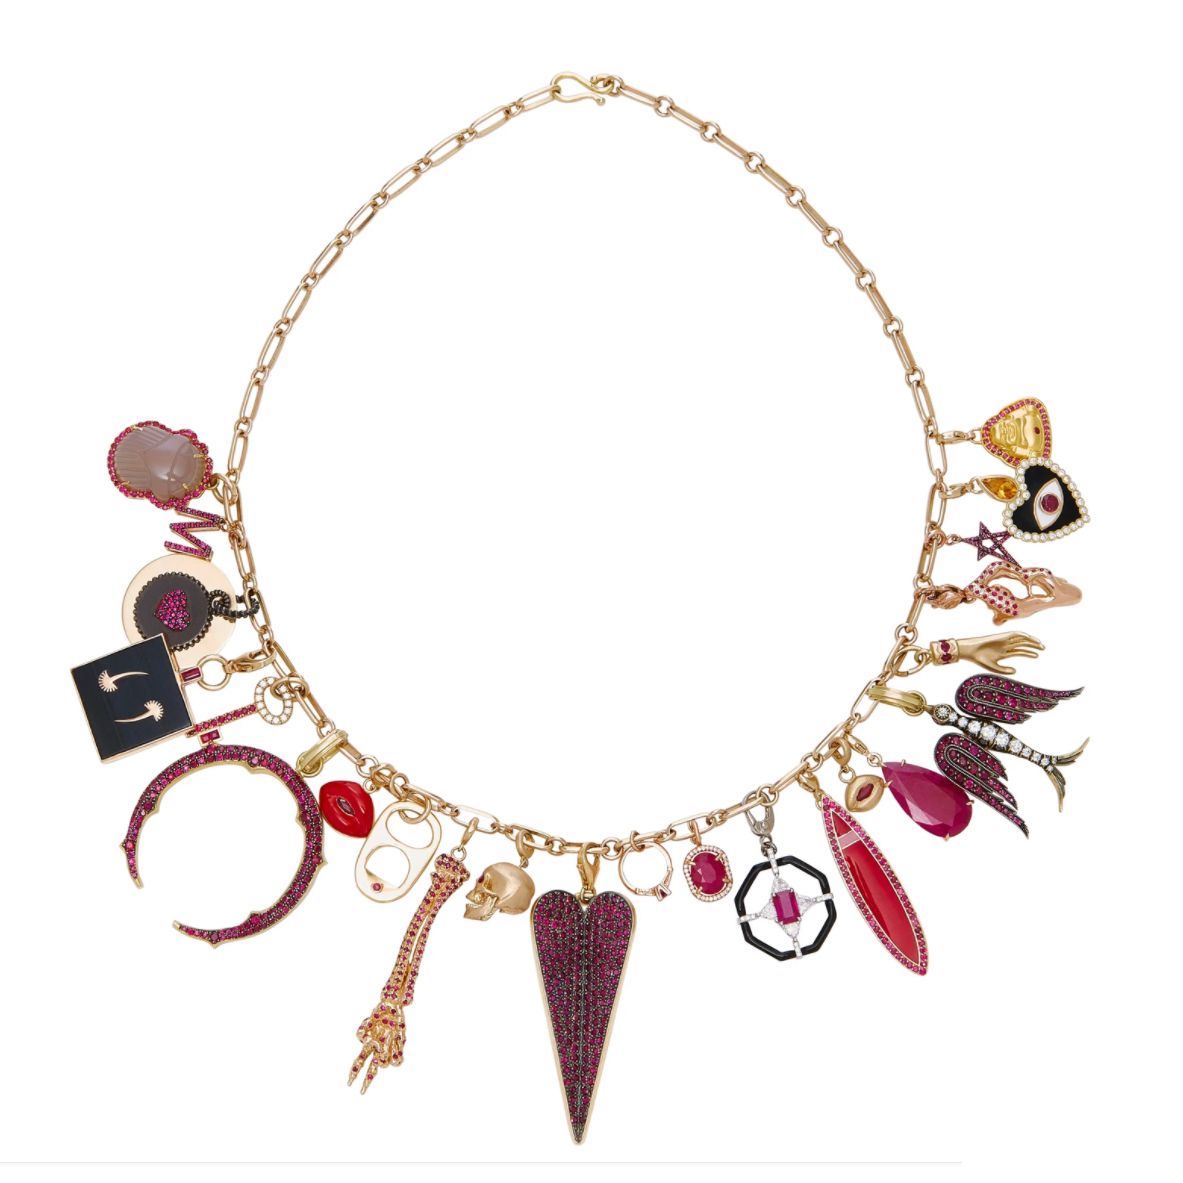 Full Ruby Charm Necklace with Gold Chain